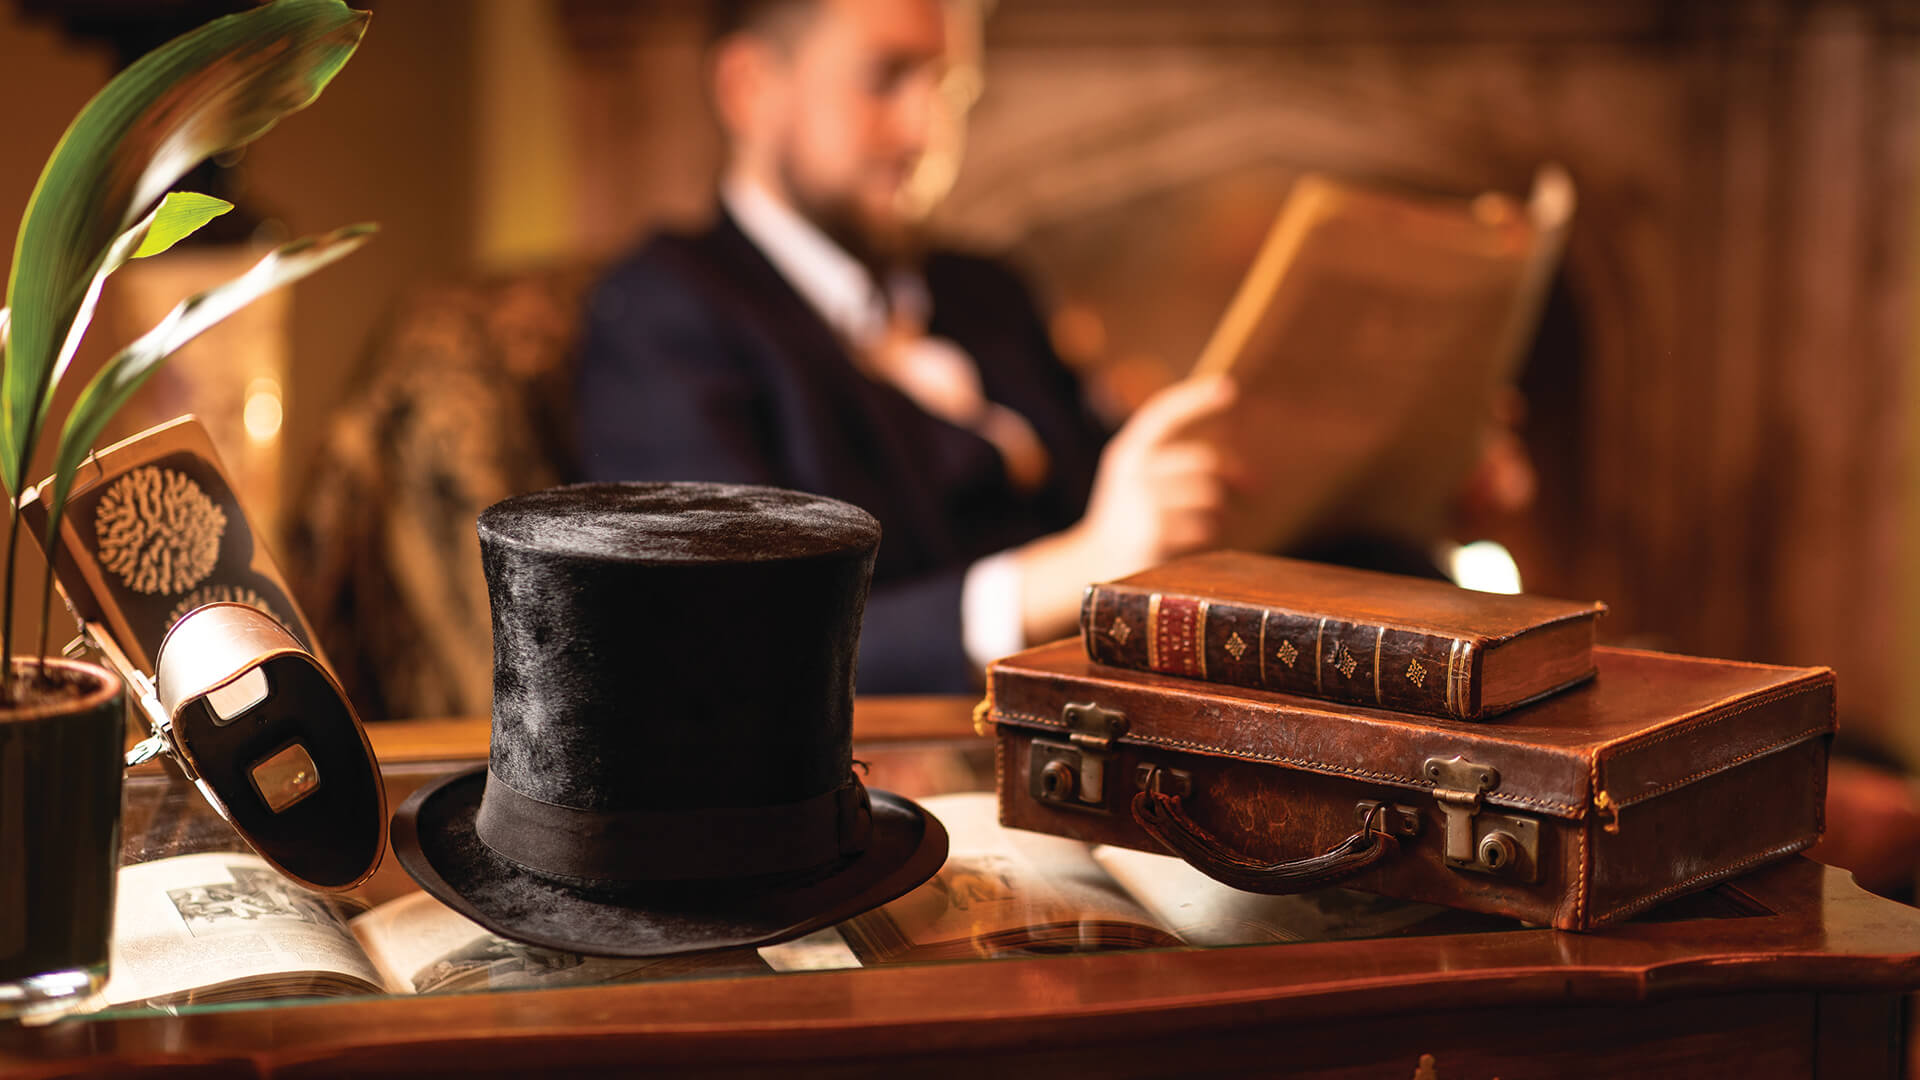 A top hat and brief case on a table